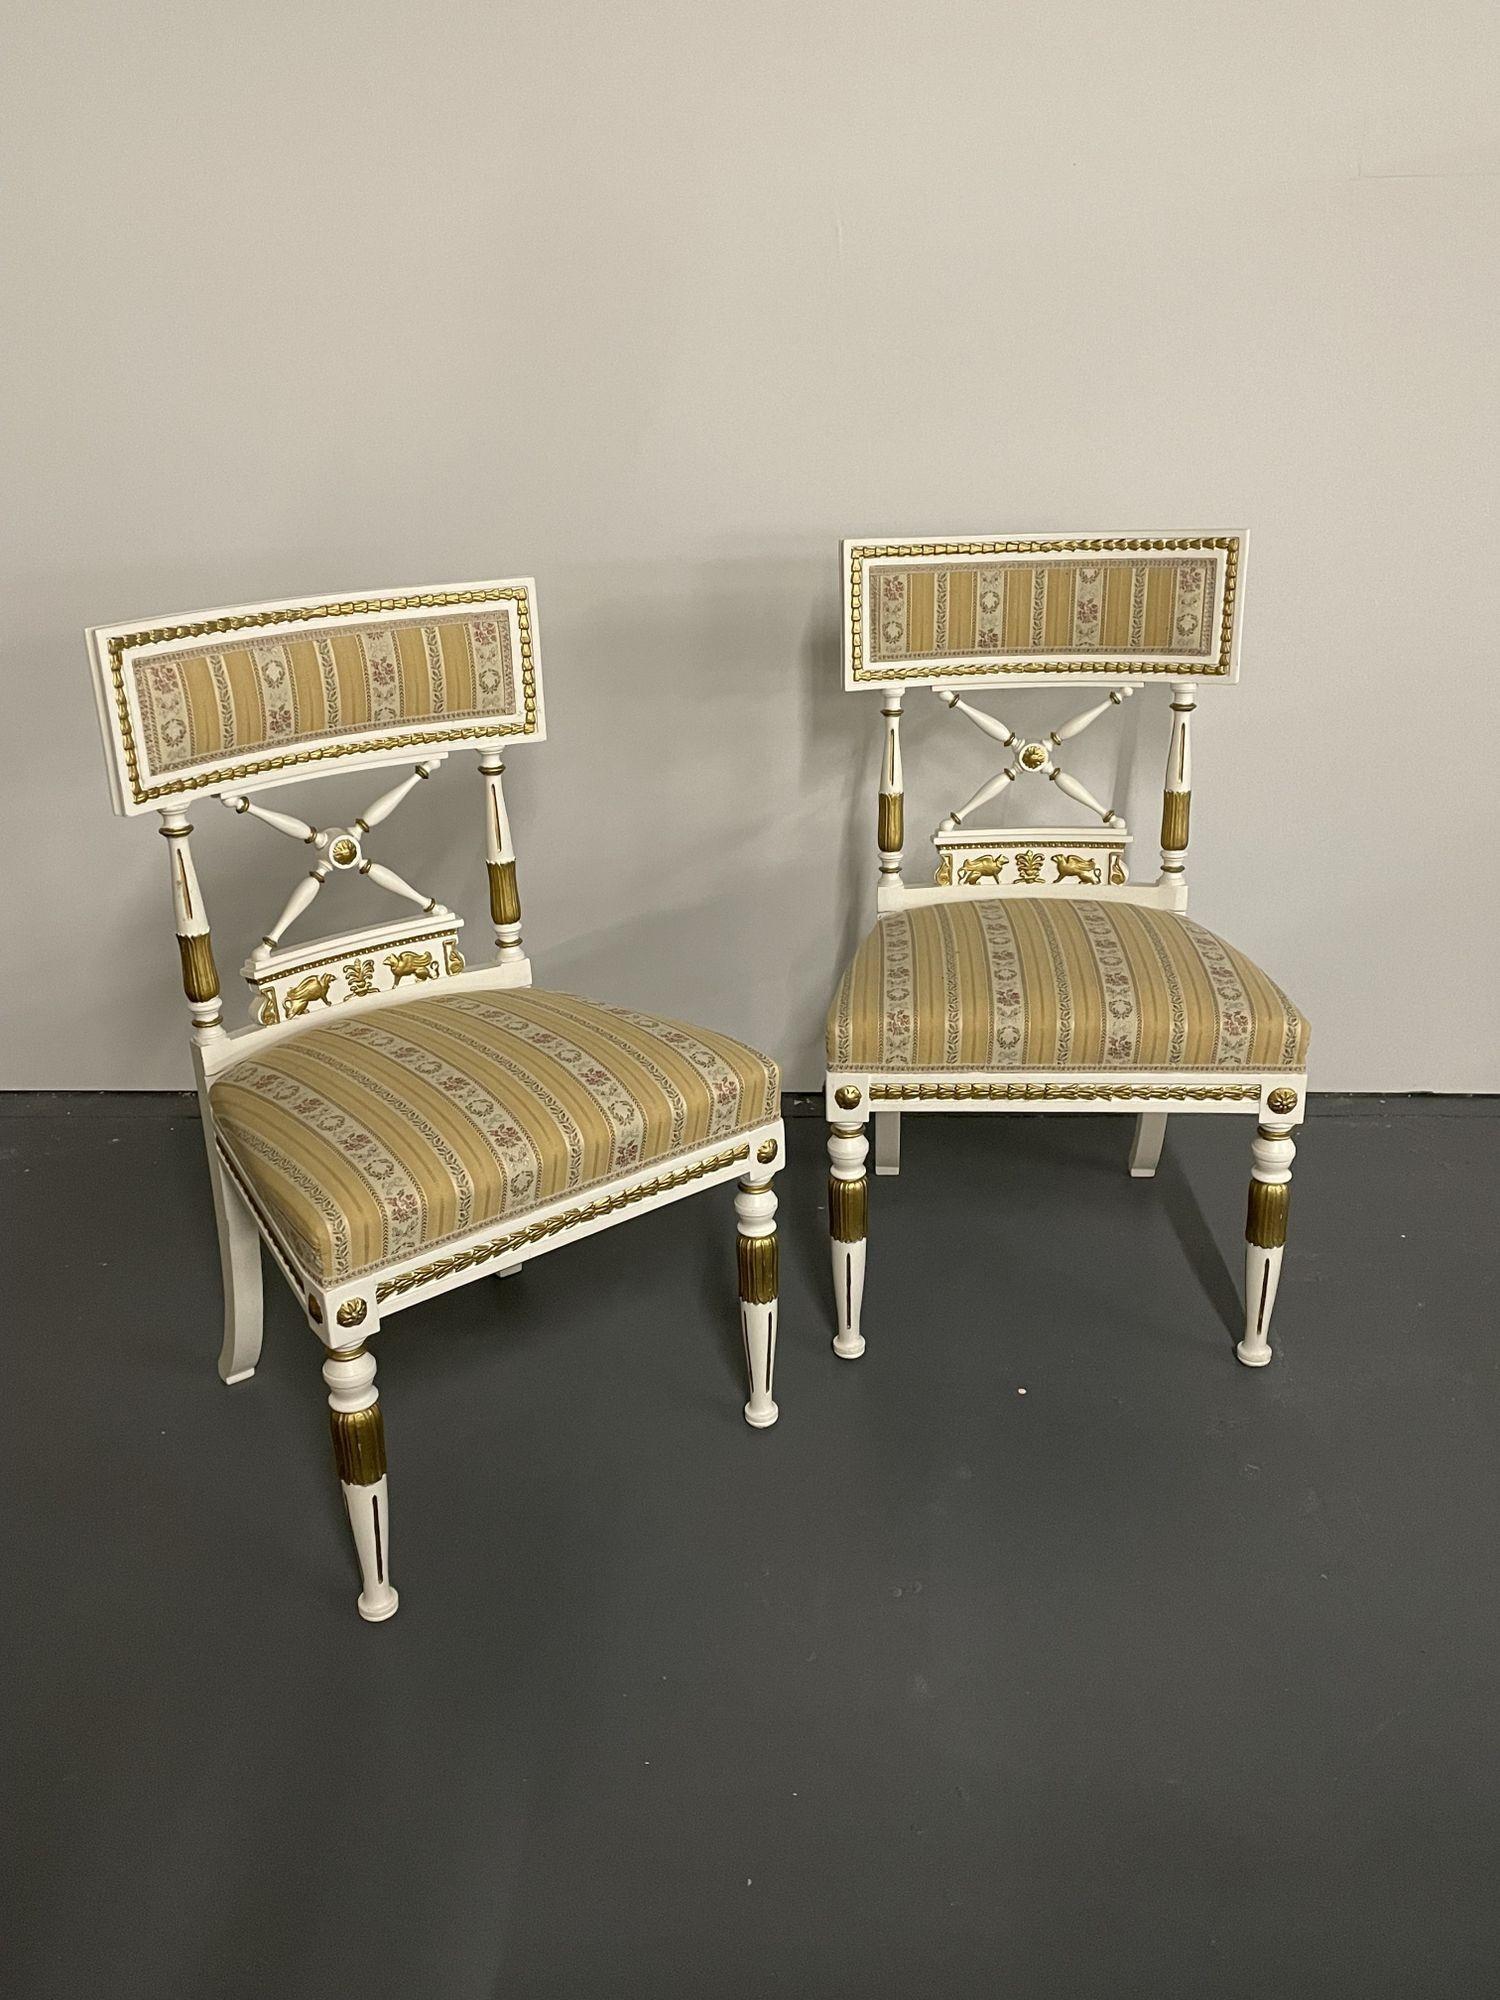 Set of 4 carved side chairs, desk chairs, office chairs. Finely detailed set of Neoclassical Gustavian Chairs each in a nice scalamandre fabric having winged sphinxes on the back rest.

Can purchase two or all four.

Seay height: 16.5 in.

